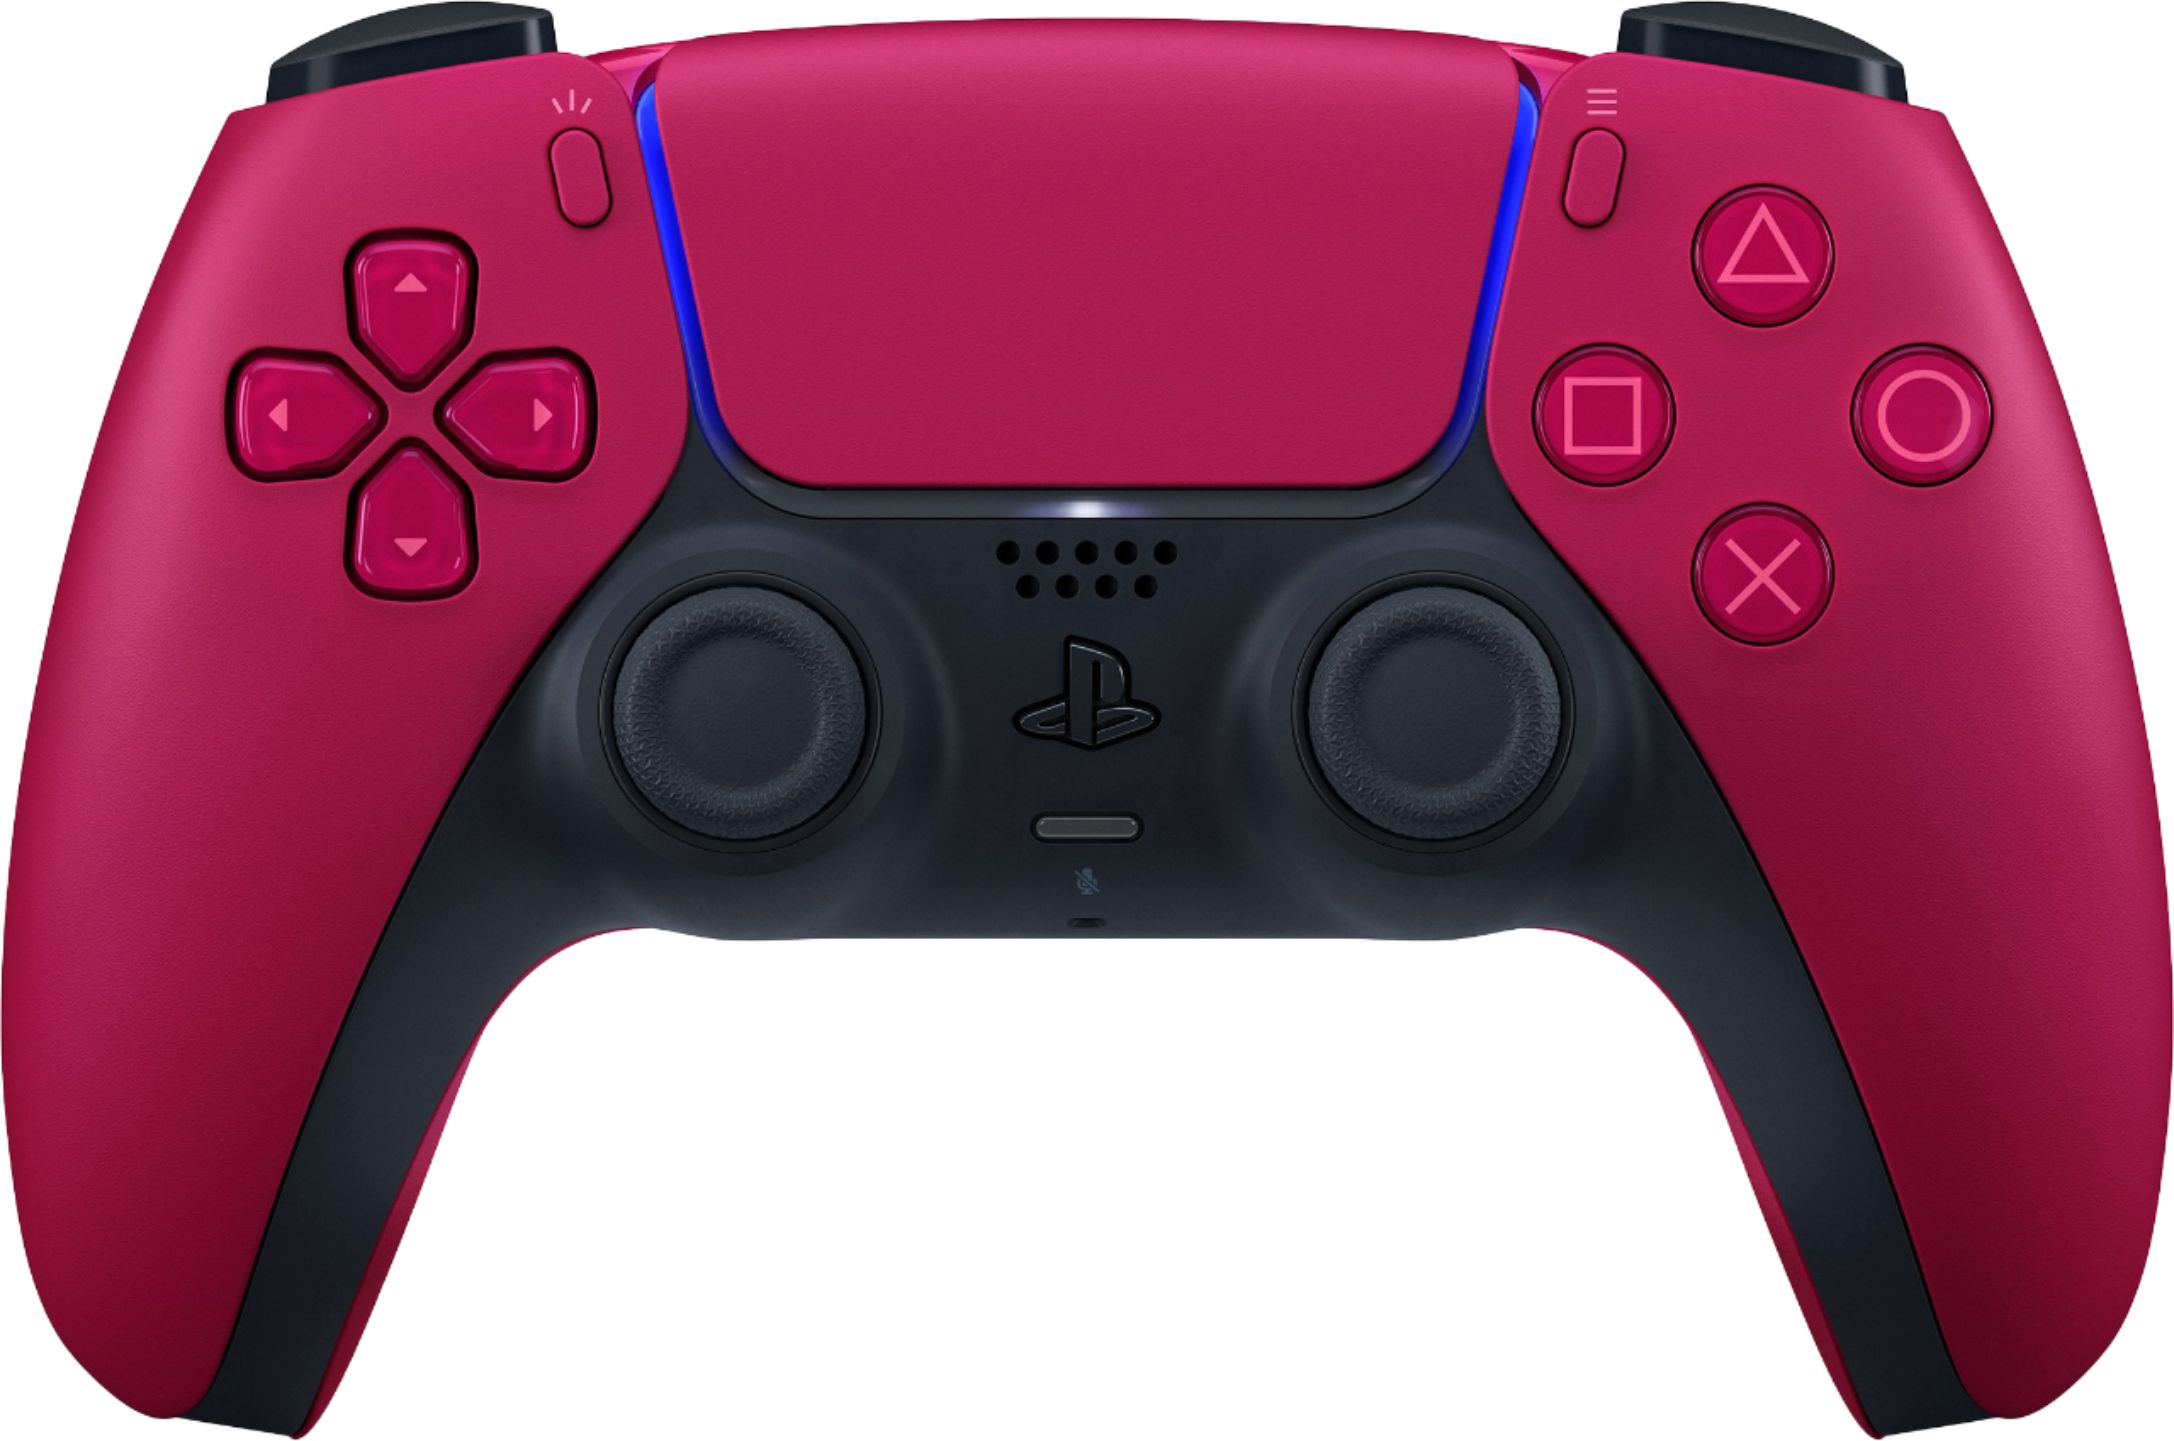 Sony - PlayStation 5 - DualSense Wireless Controller - Cosmic Red